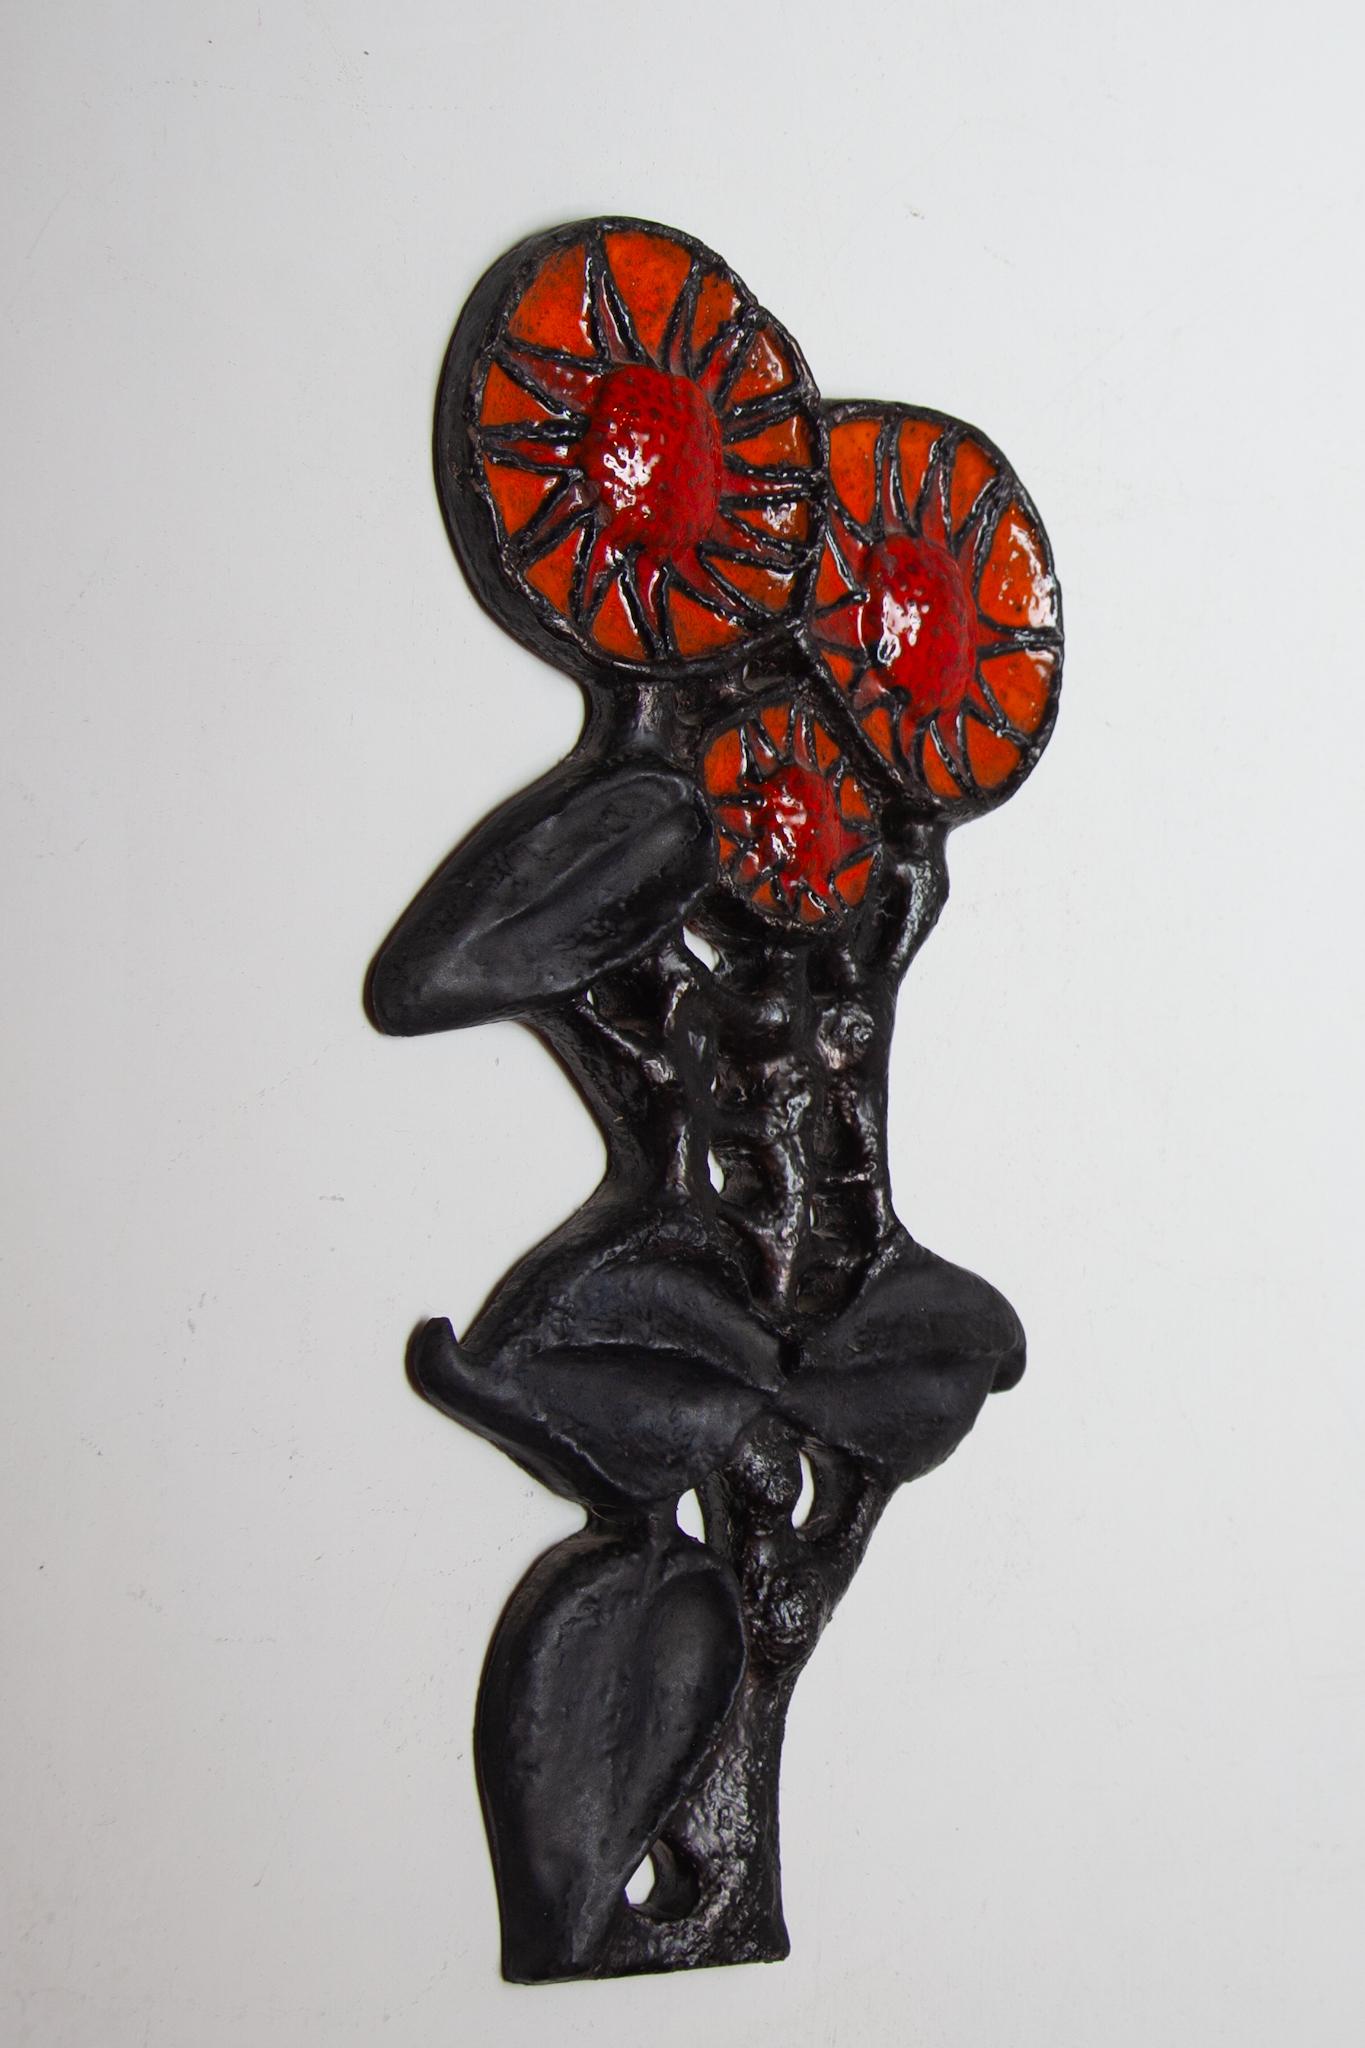 Beautiful large 1960's Belgian ceramic wall art piece fat lava flowers. Beautifully abstracted flower wall sculpture was a cooperation between Perignem and Paul Vermeire. A colorful decorative ceramic wall mounted sculpture with colors in deep red,